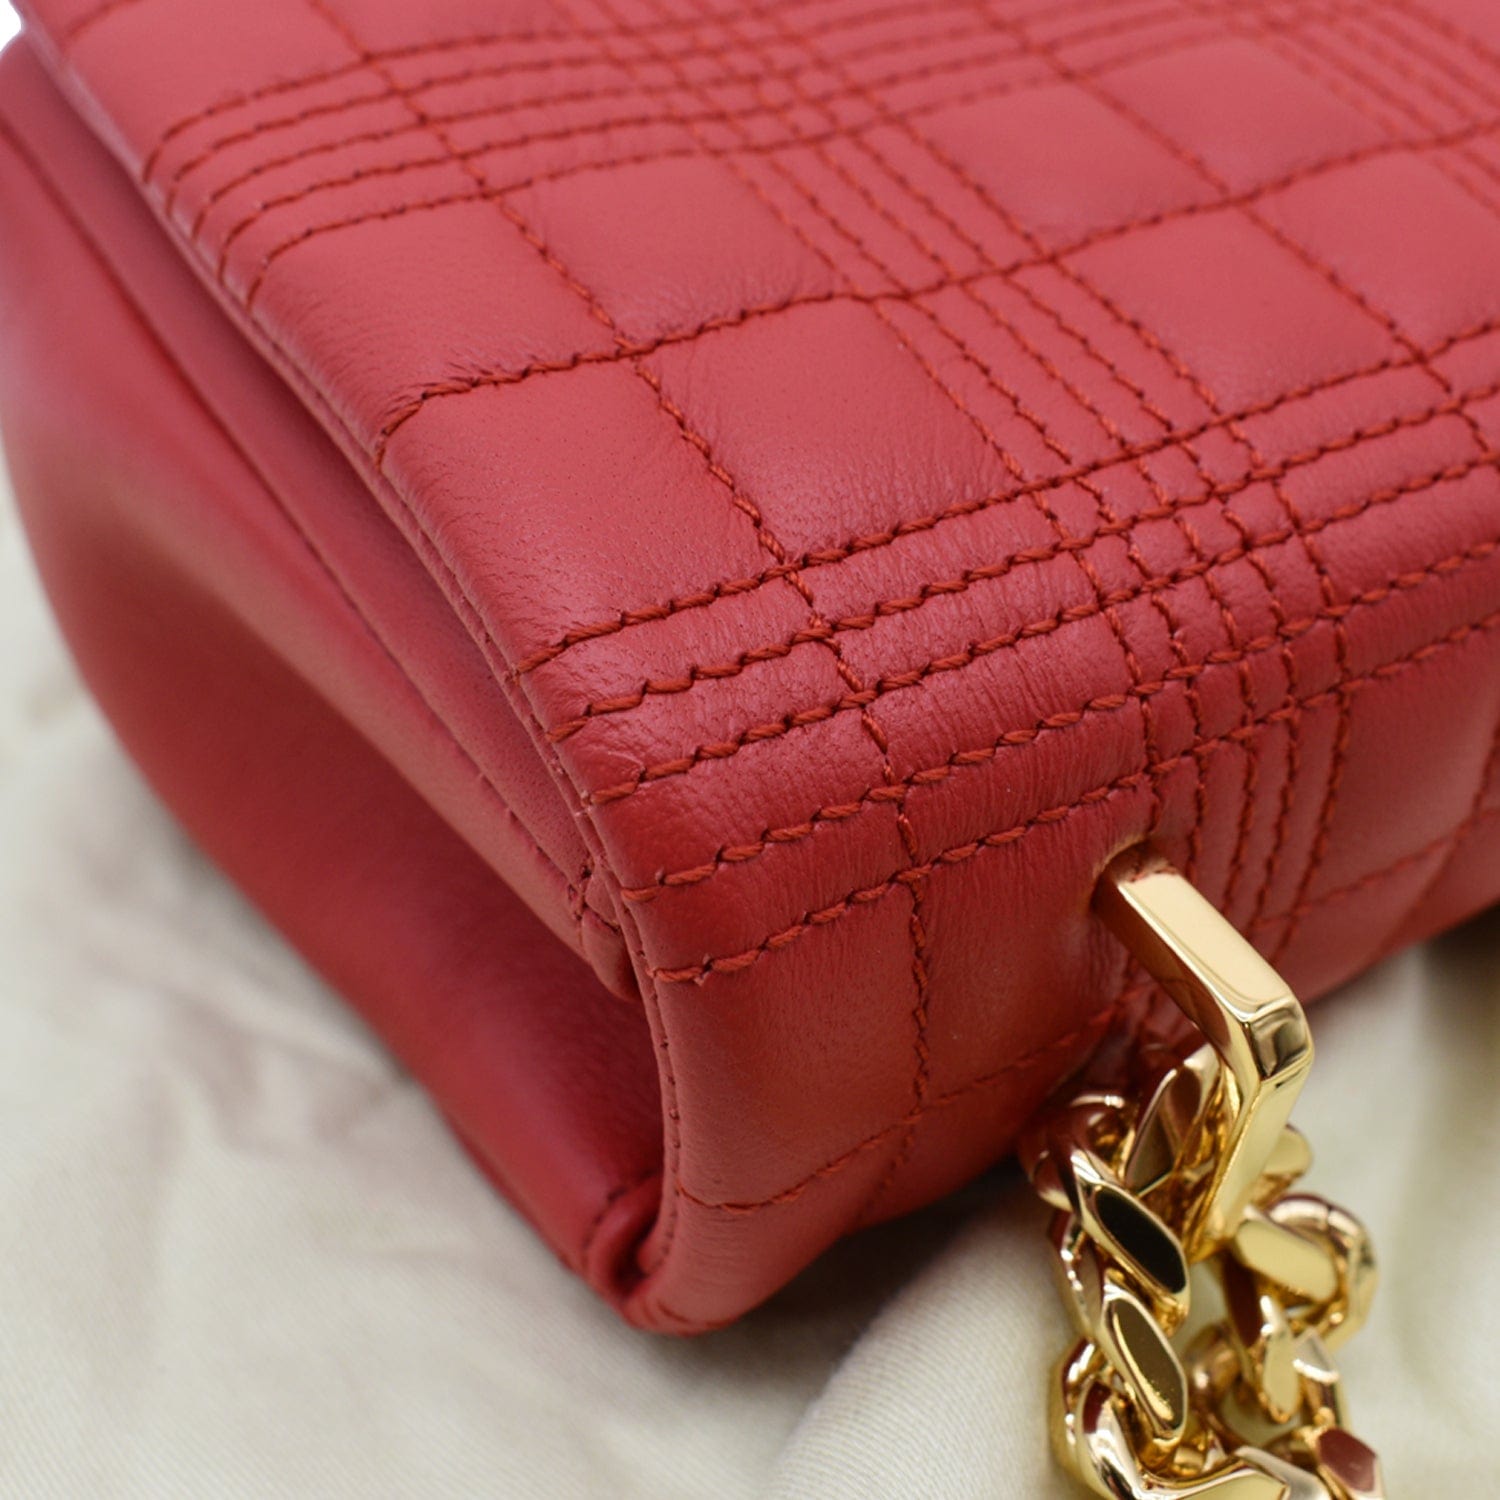 Burberry Pink Quilted Leather Mini Lola Chain Crossbody Bag